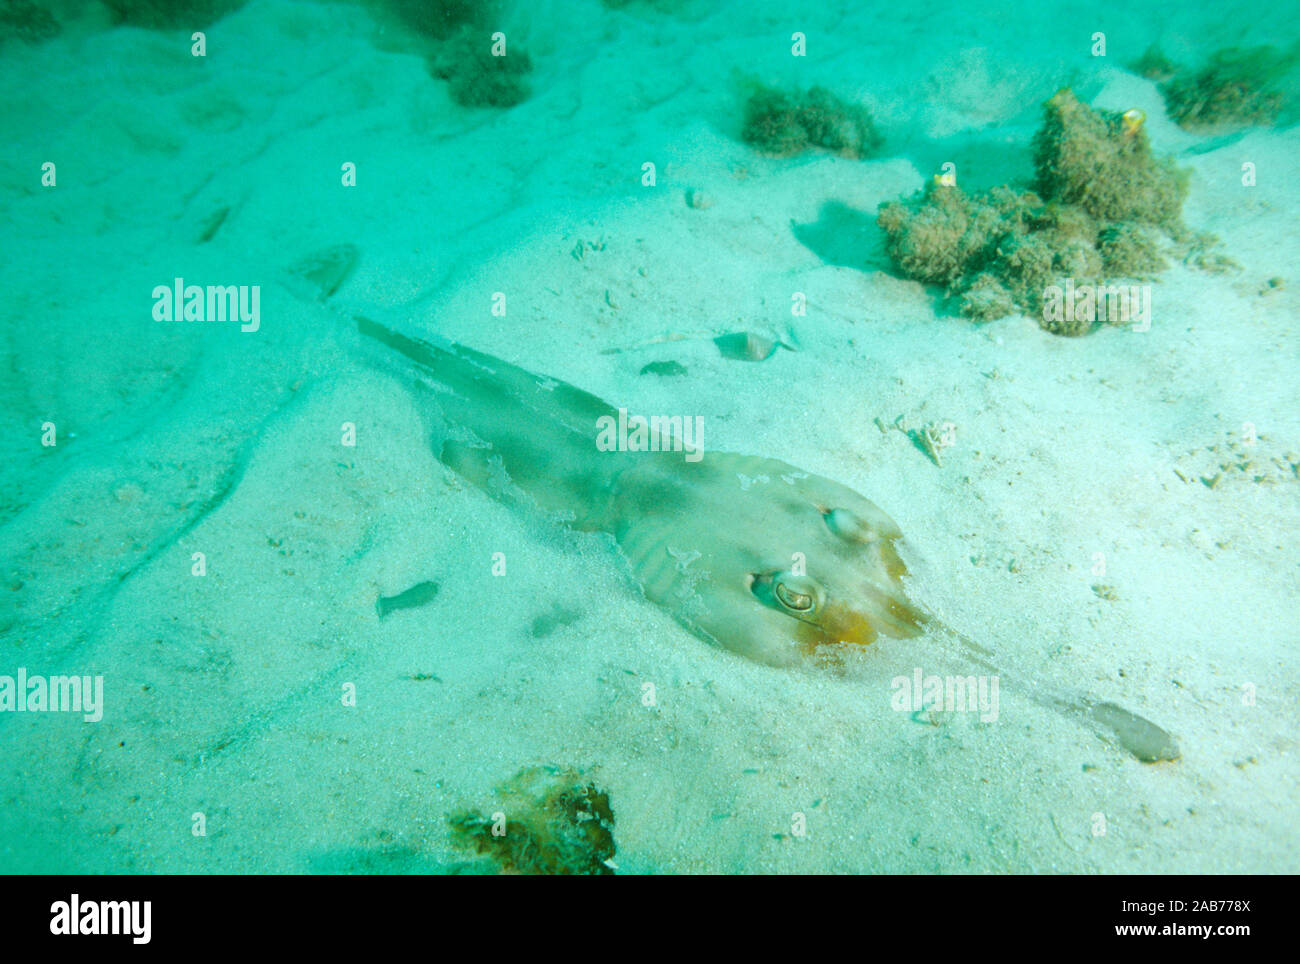 Eastern shovelnose ray (Aptychotrema rostrata), can reach a metre long. Northern New South Wales, Australia Stock Photo